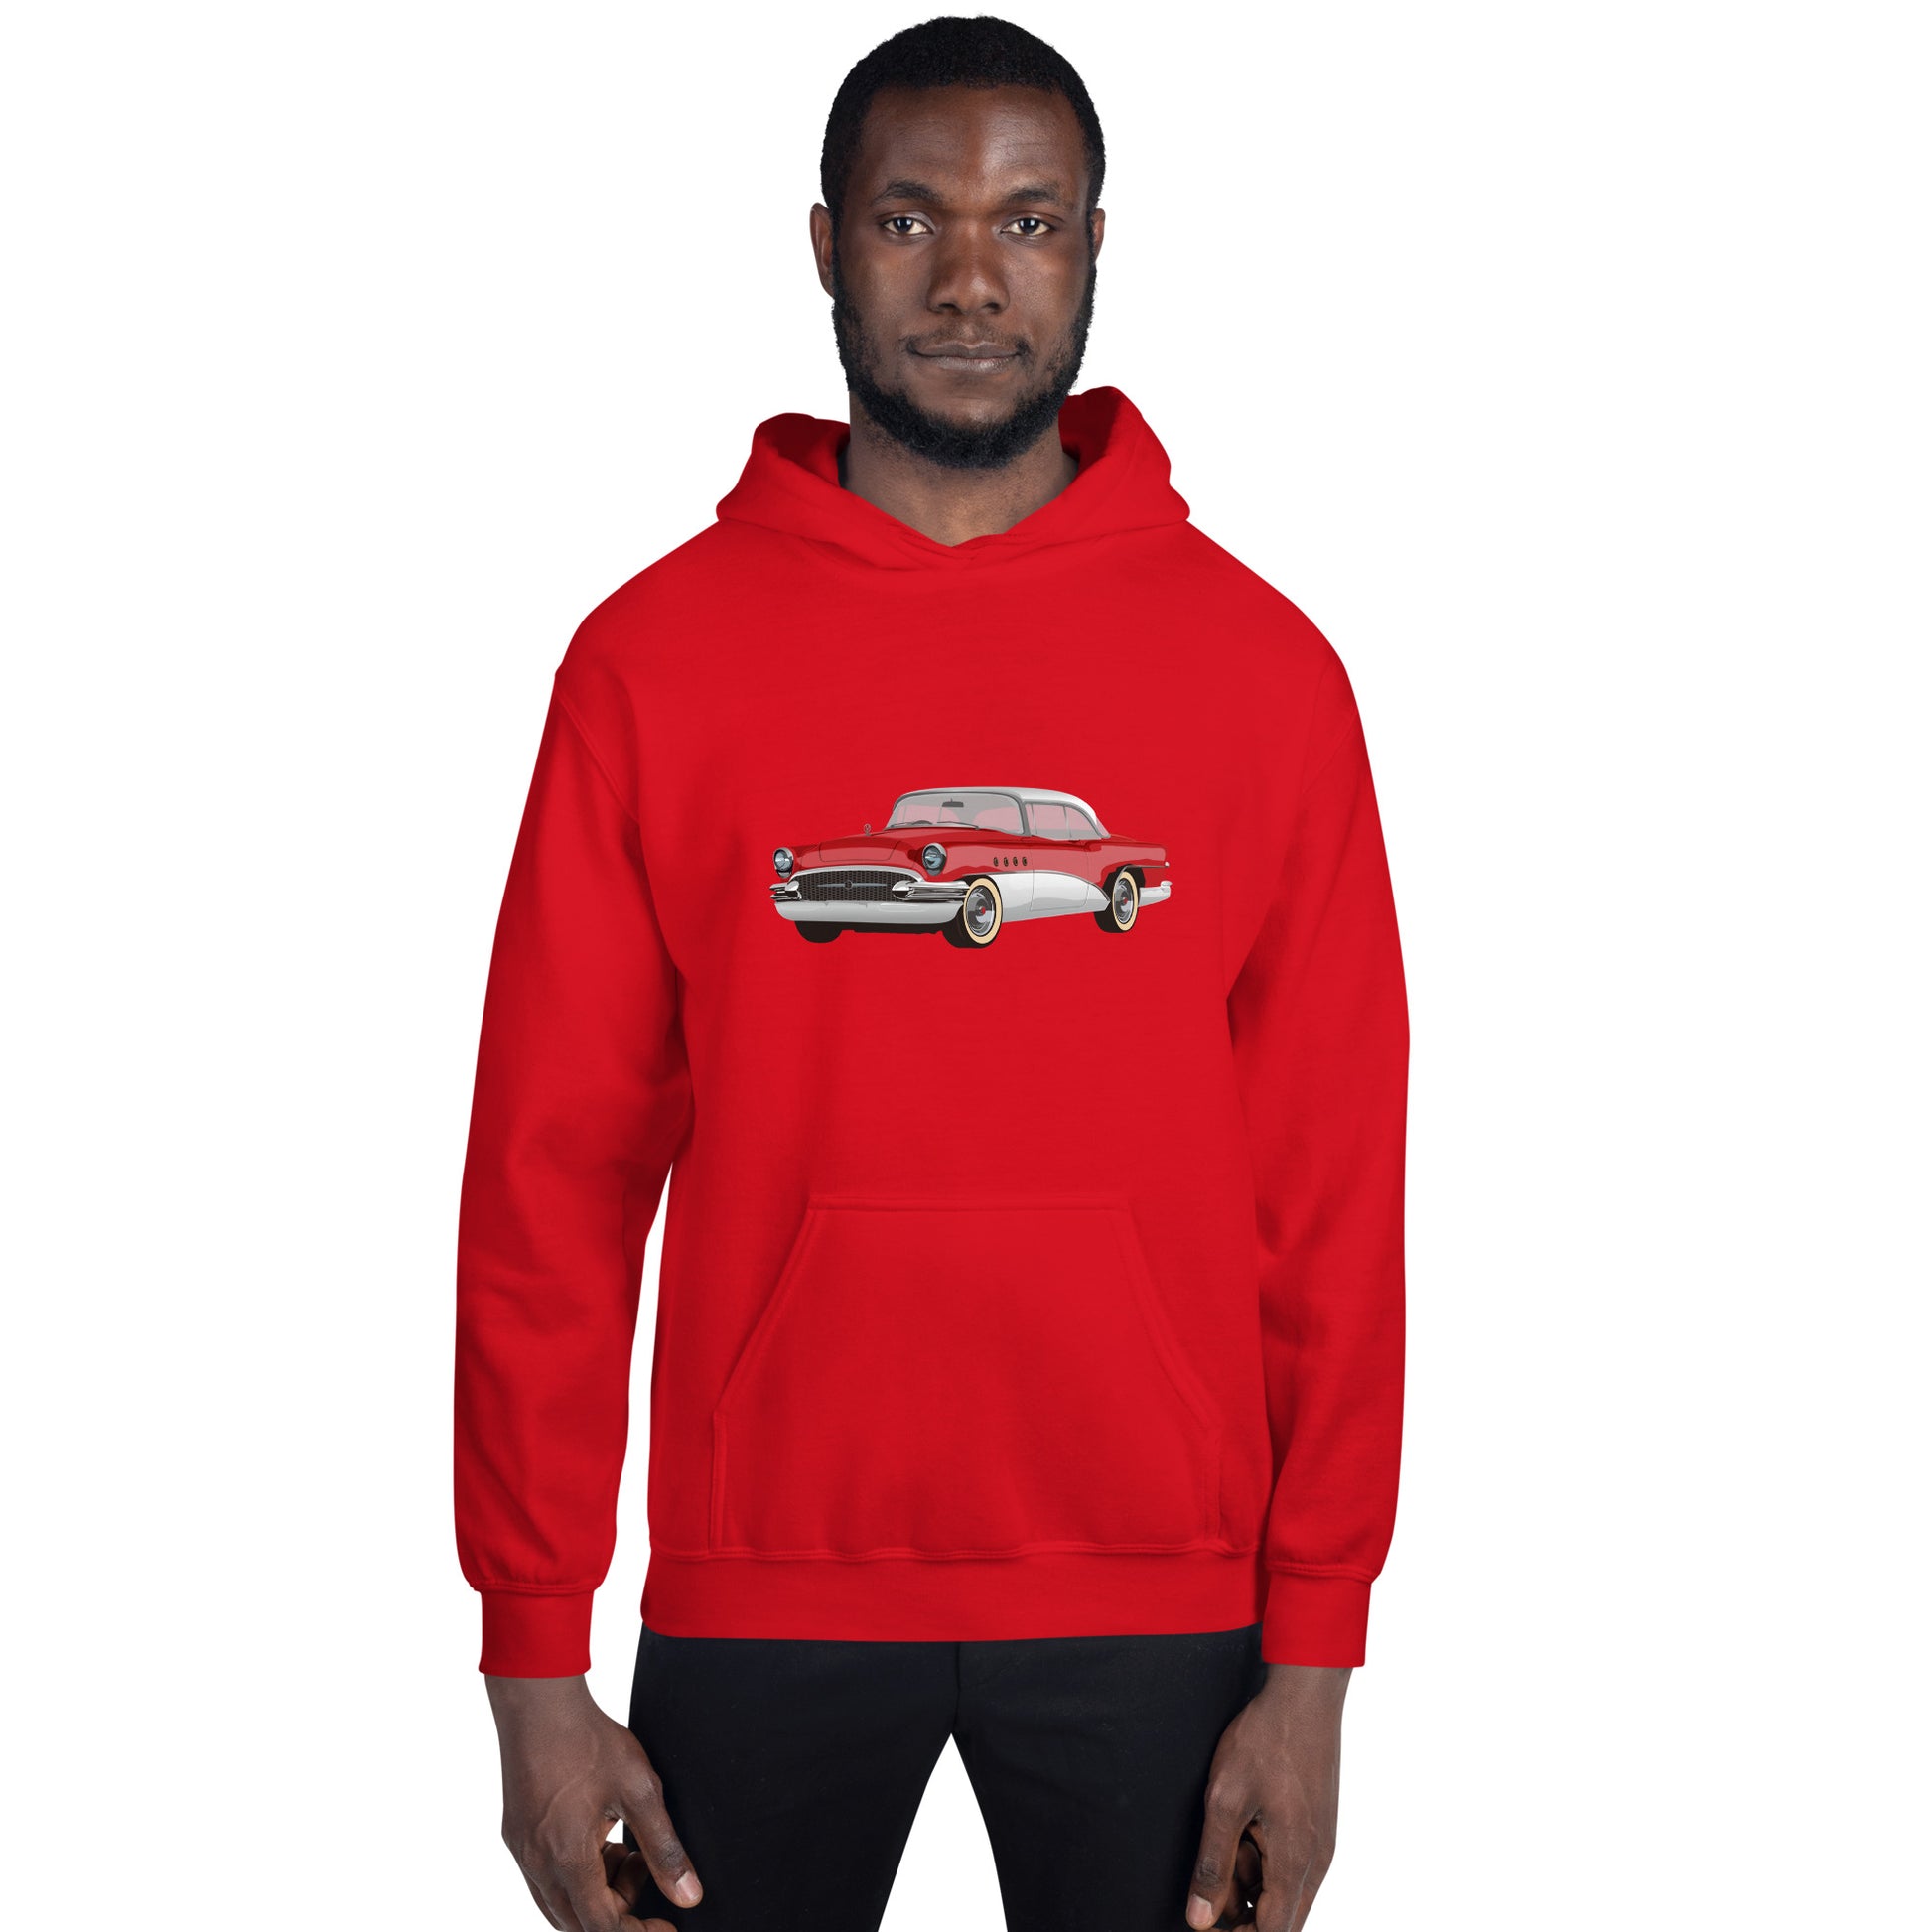 Man with red hoodie with red chevrolet